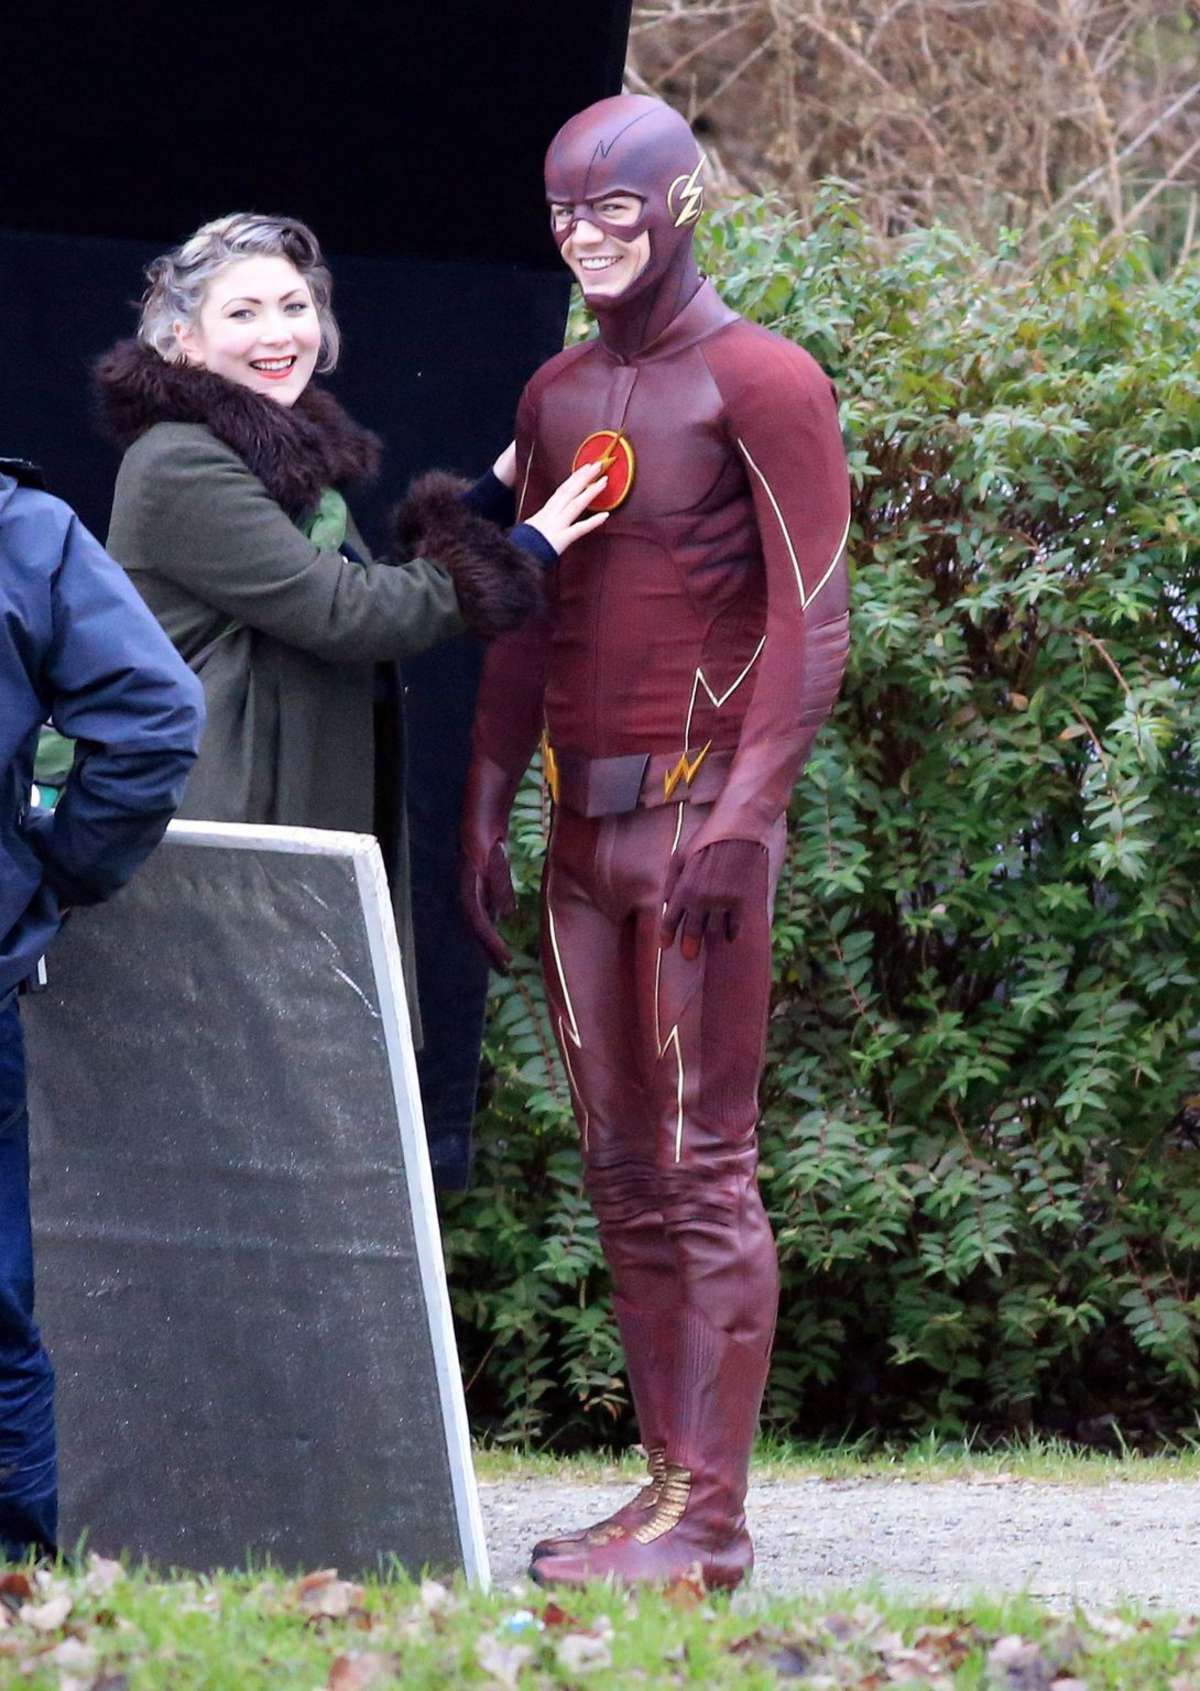 Grant Gustin and Candice Patton Filming The Flash in Vancouver